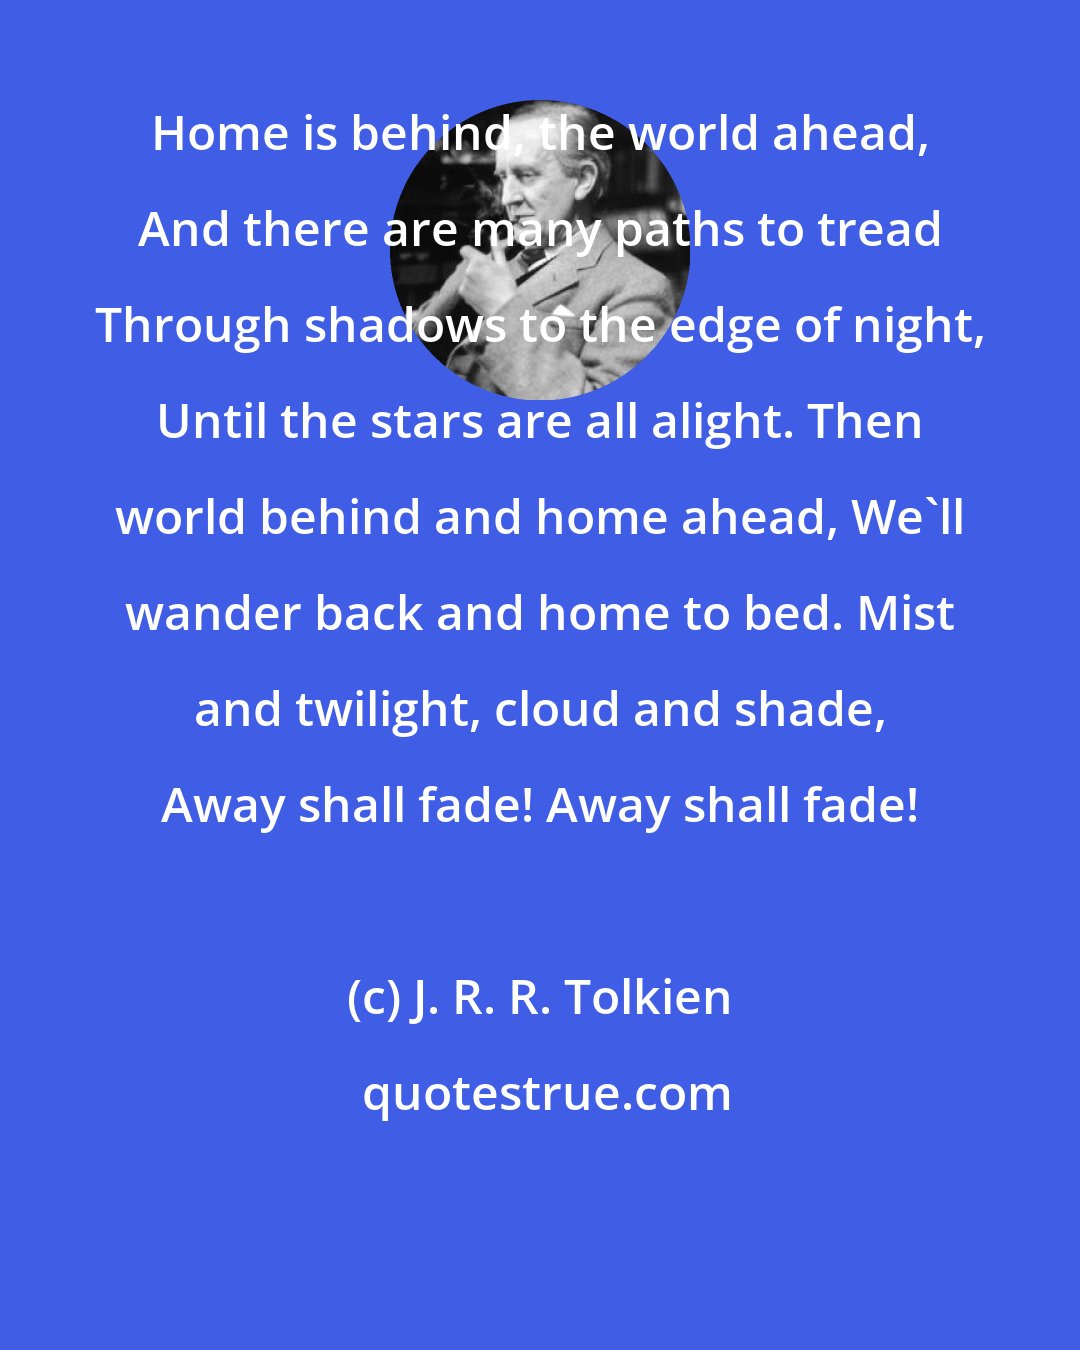 J. R. R. Tolkien: Home is behind, the world ahead, And there are many paths to tread Through shadows to the edge of night, Until the stars are all alight. Then world behind and home ahead, We'll wander back and home to bed. Mist and twilight, cloud and shade, Away shall fade! Away shall fade!